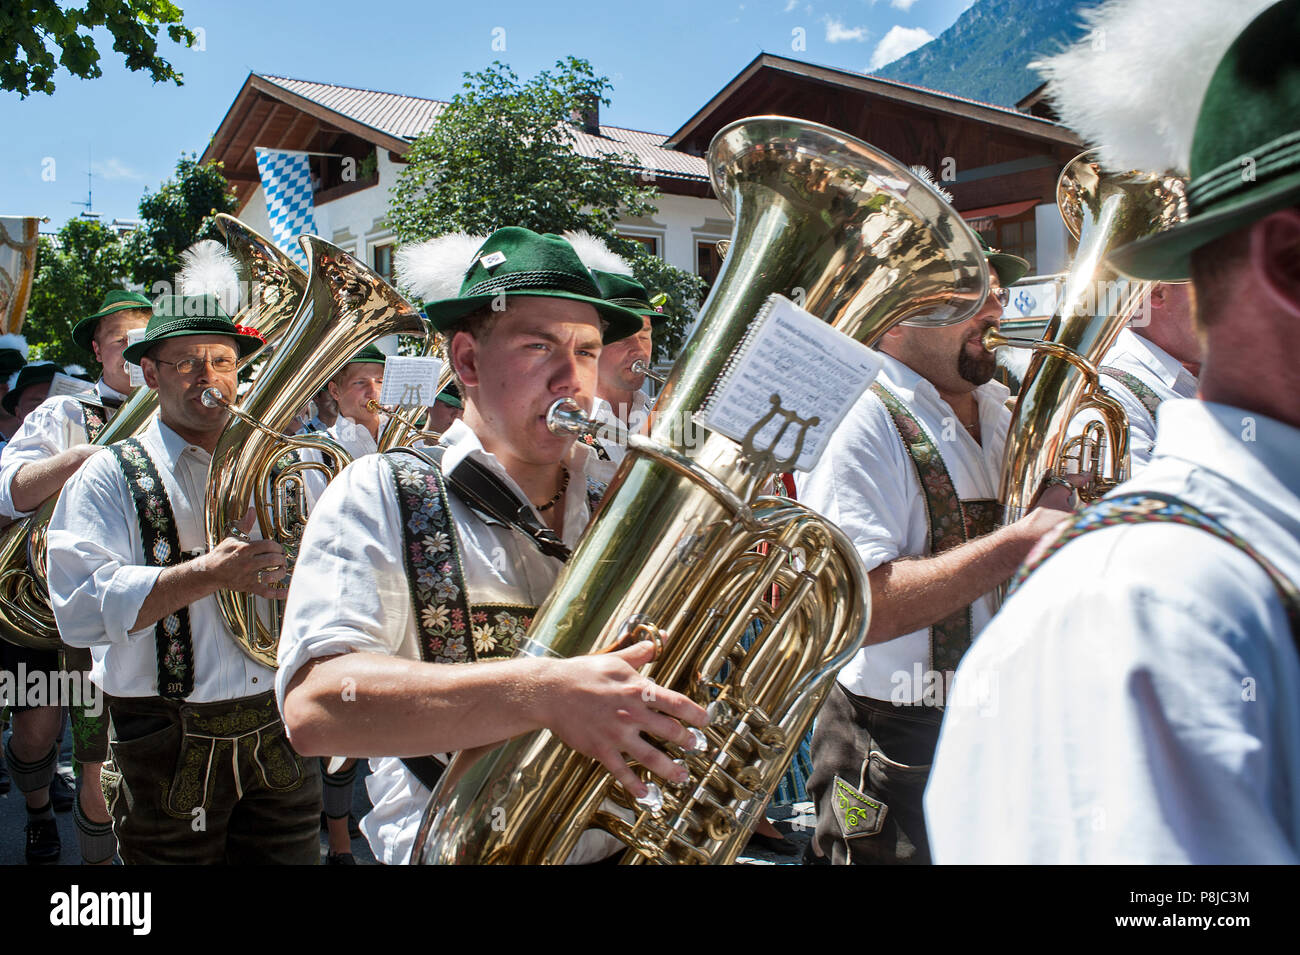 Procession of a Bavarian brass band in the city of Garmisch-Partenkirchen. Stock Photo